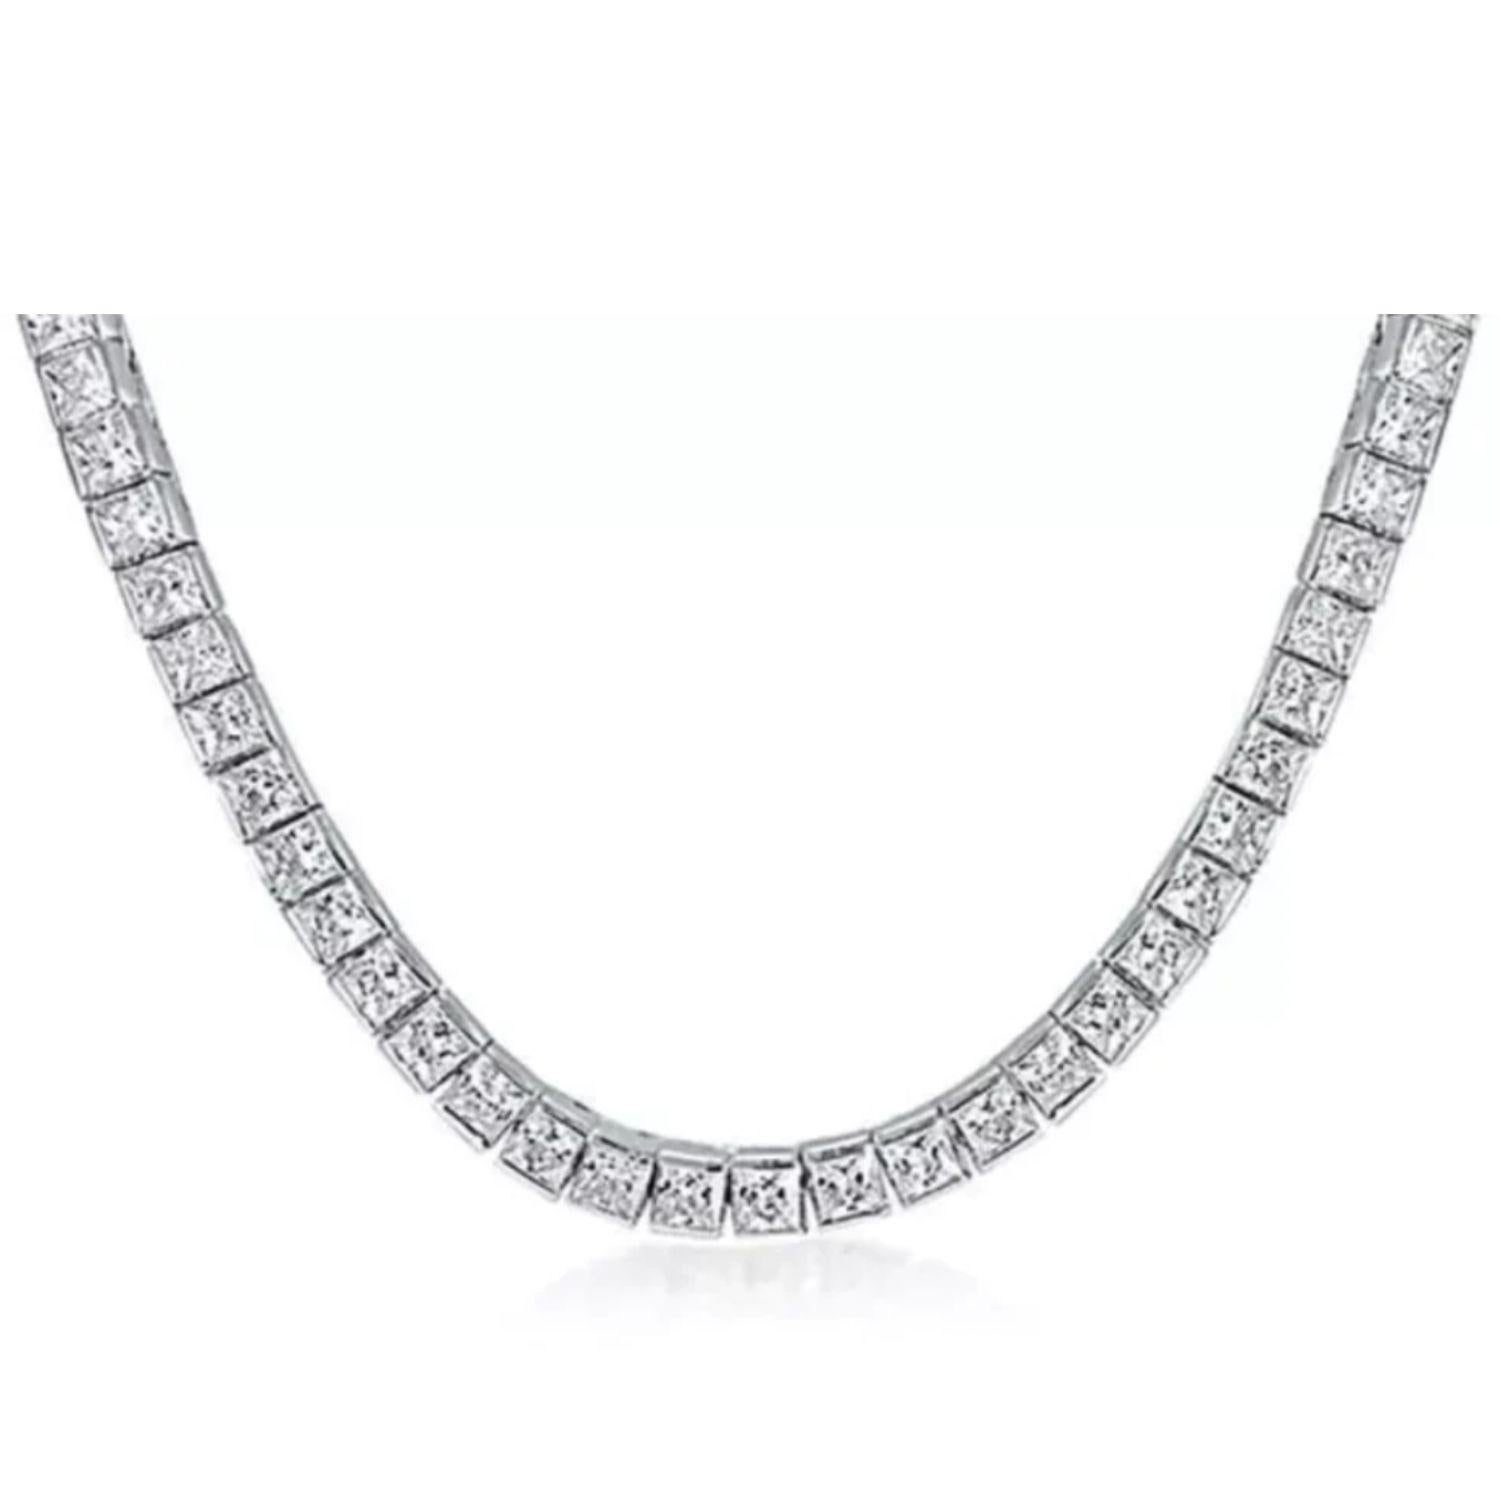 A stunning, 91 piece Princess Cut Diamond Tennis Necklace, weighing 28.82 carats total. 
The necklace is set in 18K White Gold, and each Diamond is GIA certified, all D/E color, VVS/VS quality. 
